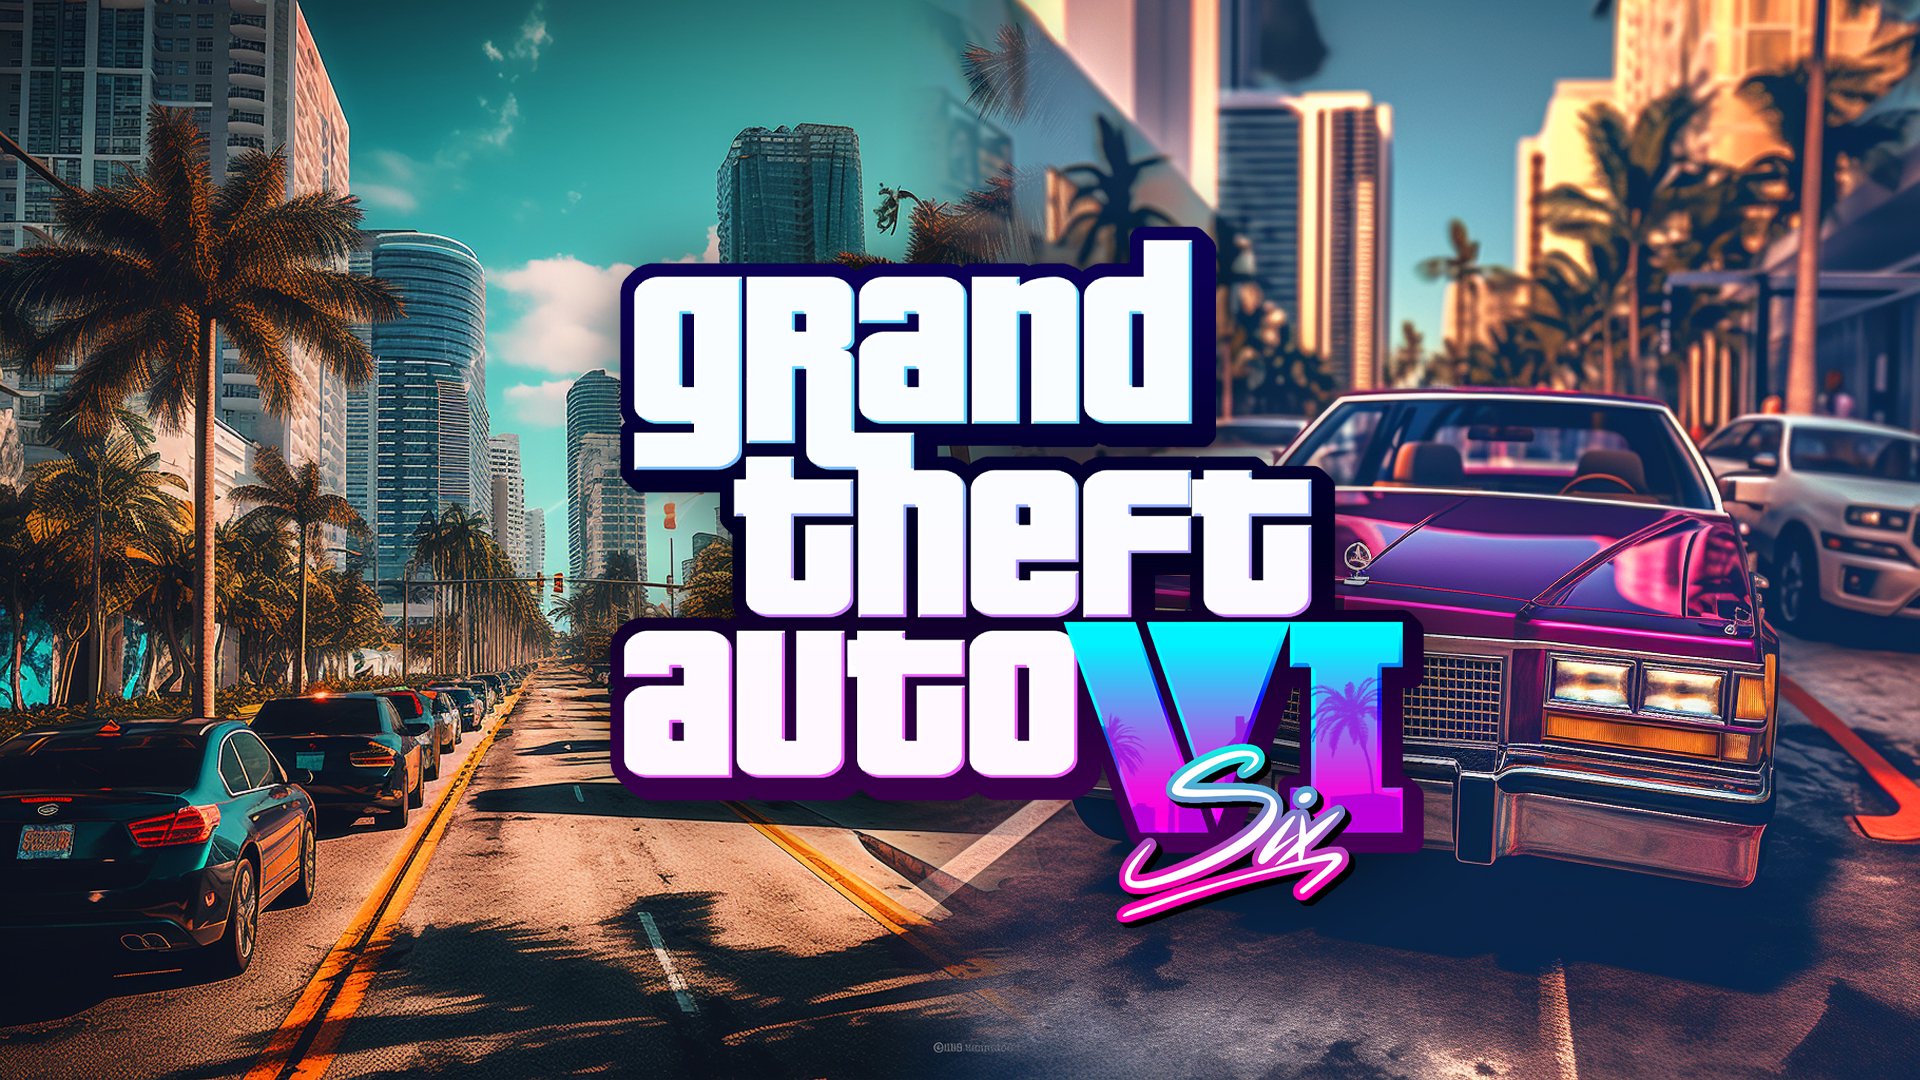 GTA 6 price - Start saving NOW for Grand Theft Auto sequel, Gaming, Entertainment